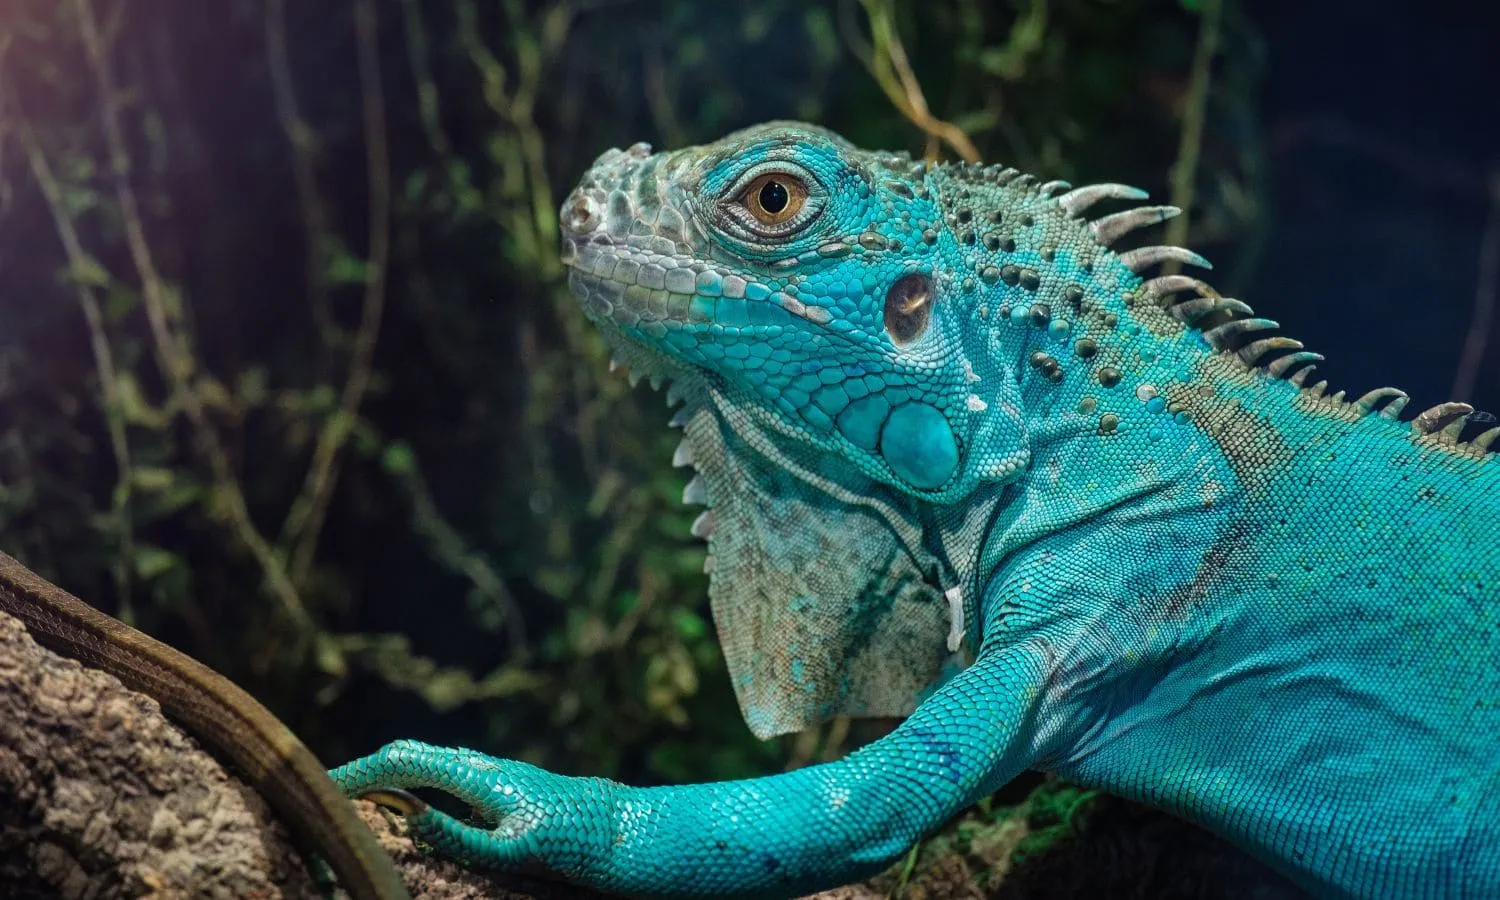 Blue Iguana, an exciting reptile encounter in the Green Planet in Dubai